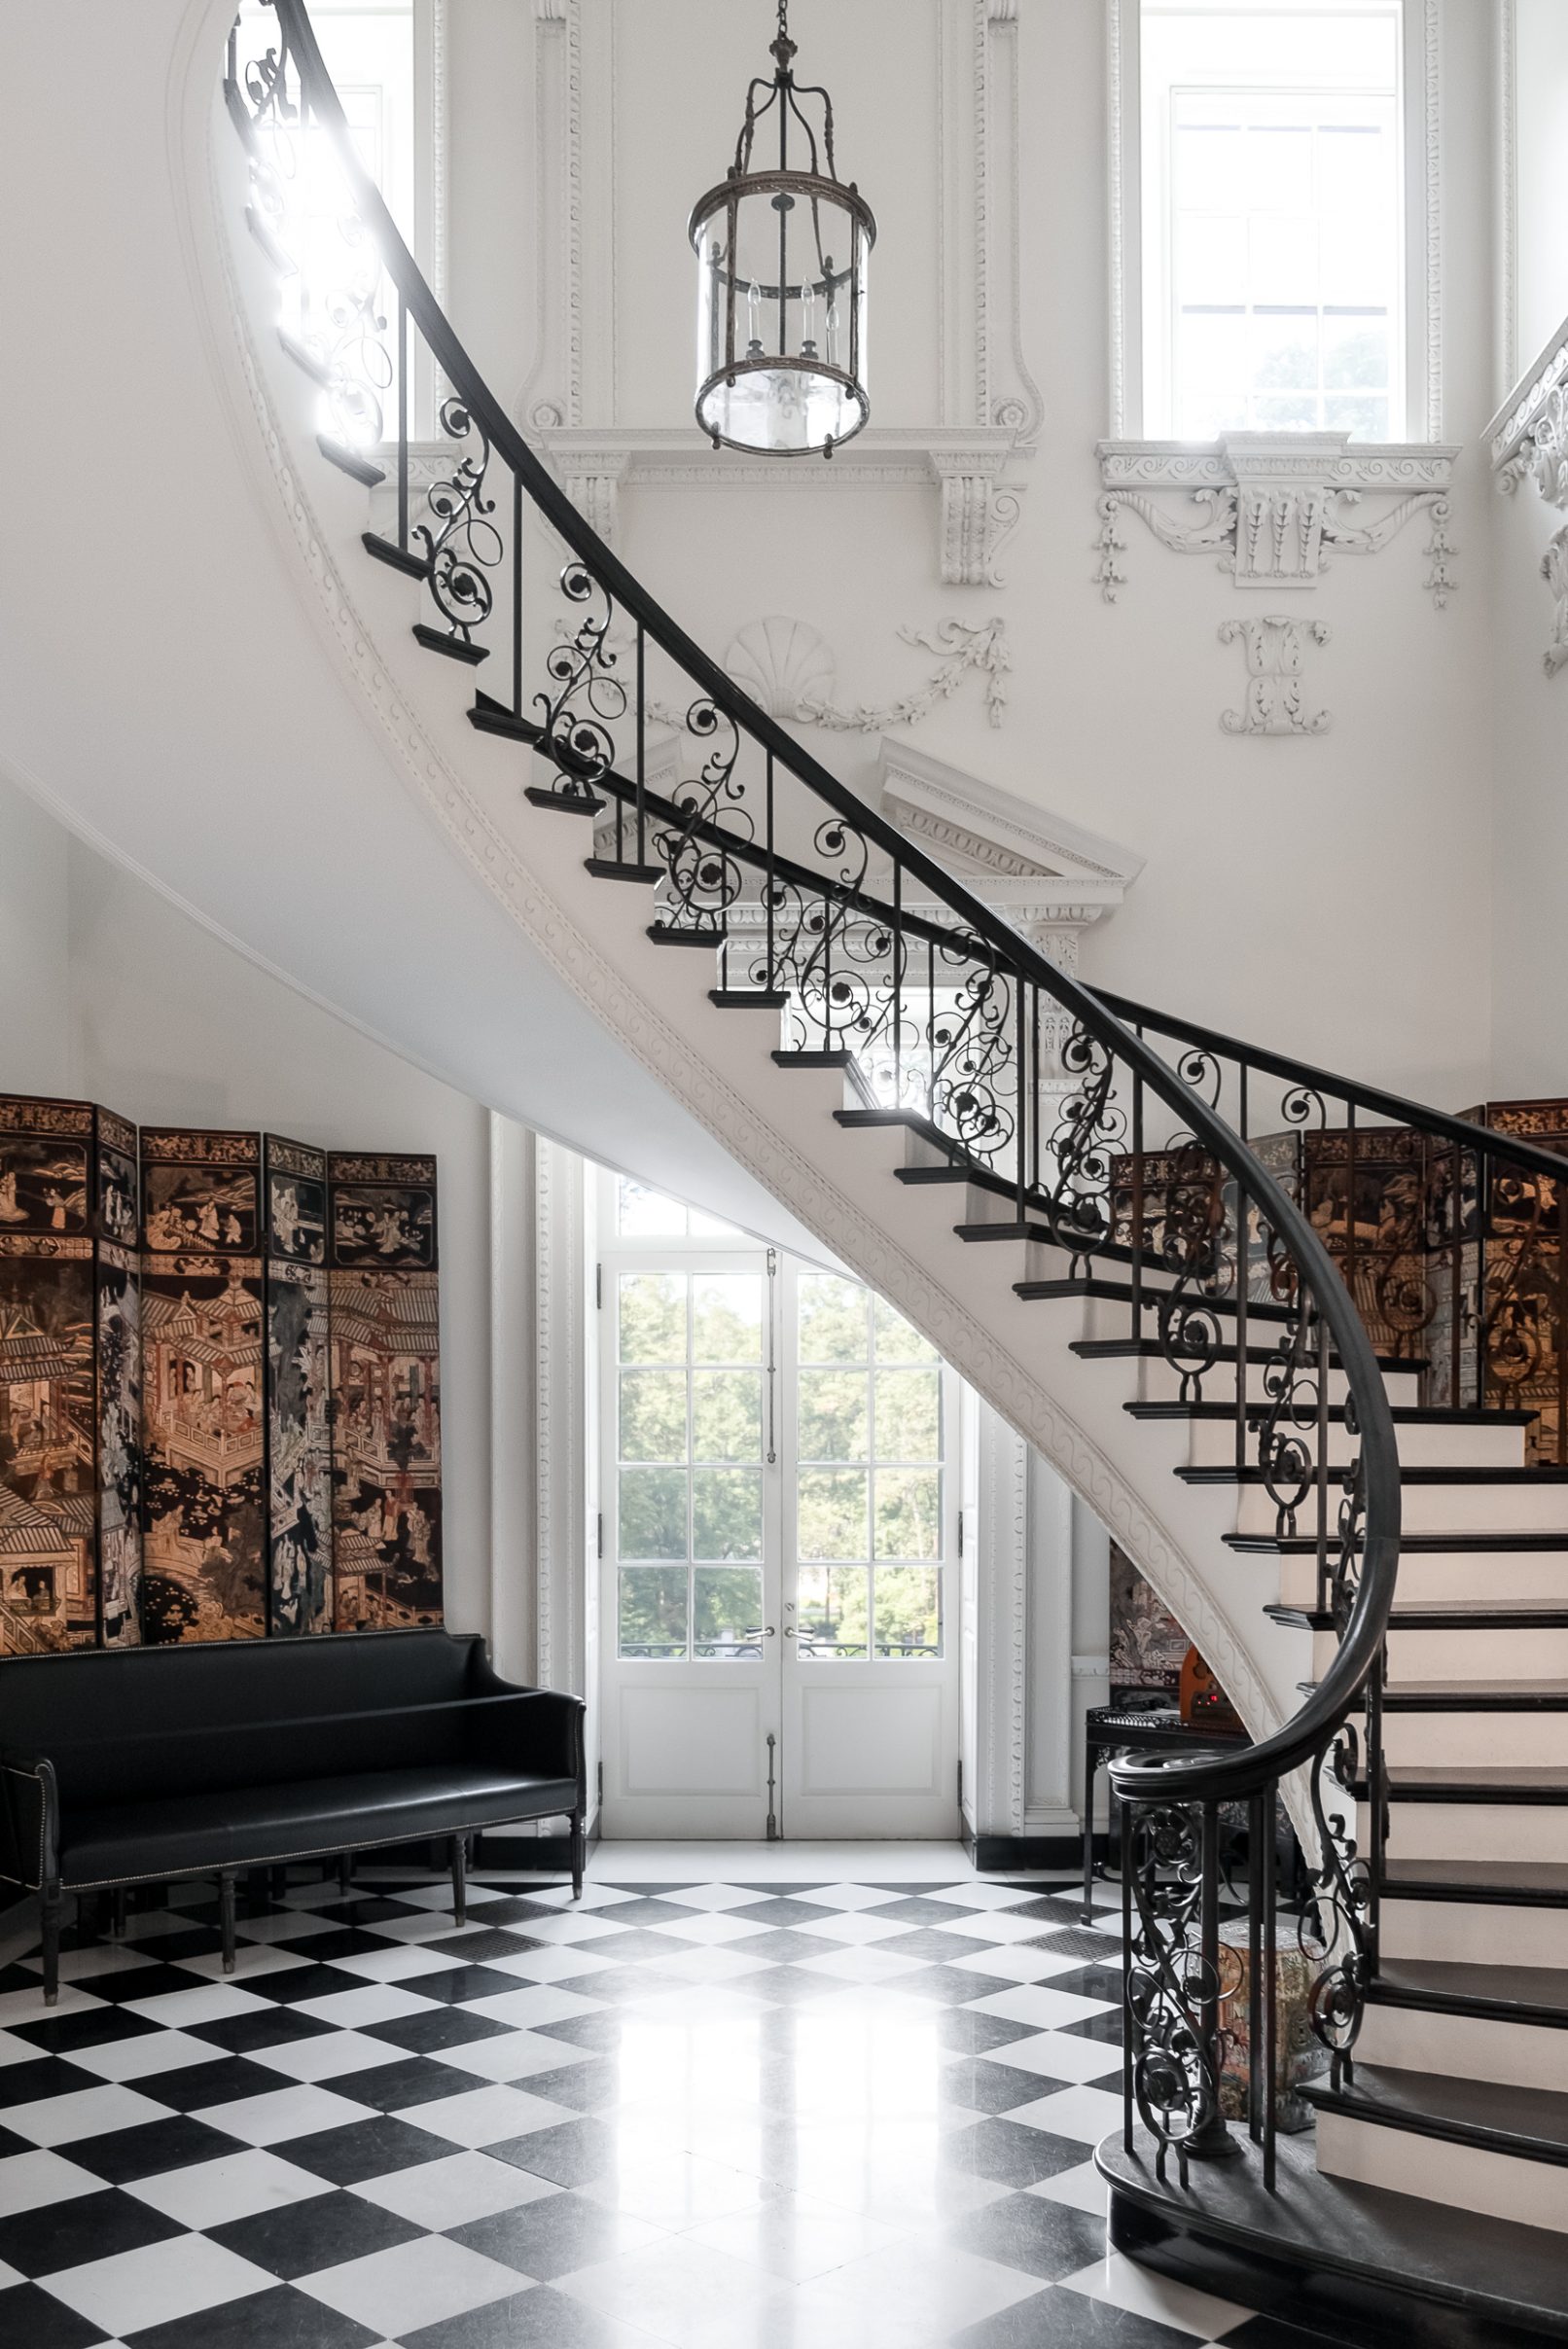 Interior Design Photography of a dramatic staircase in an Orange County California mansion with a black and white checkered floor and bold windows with old world plaster decor surrounding them